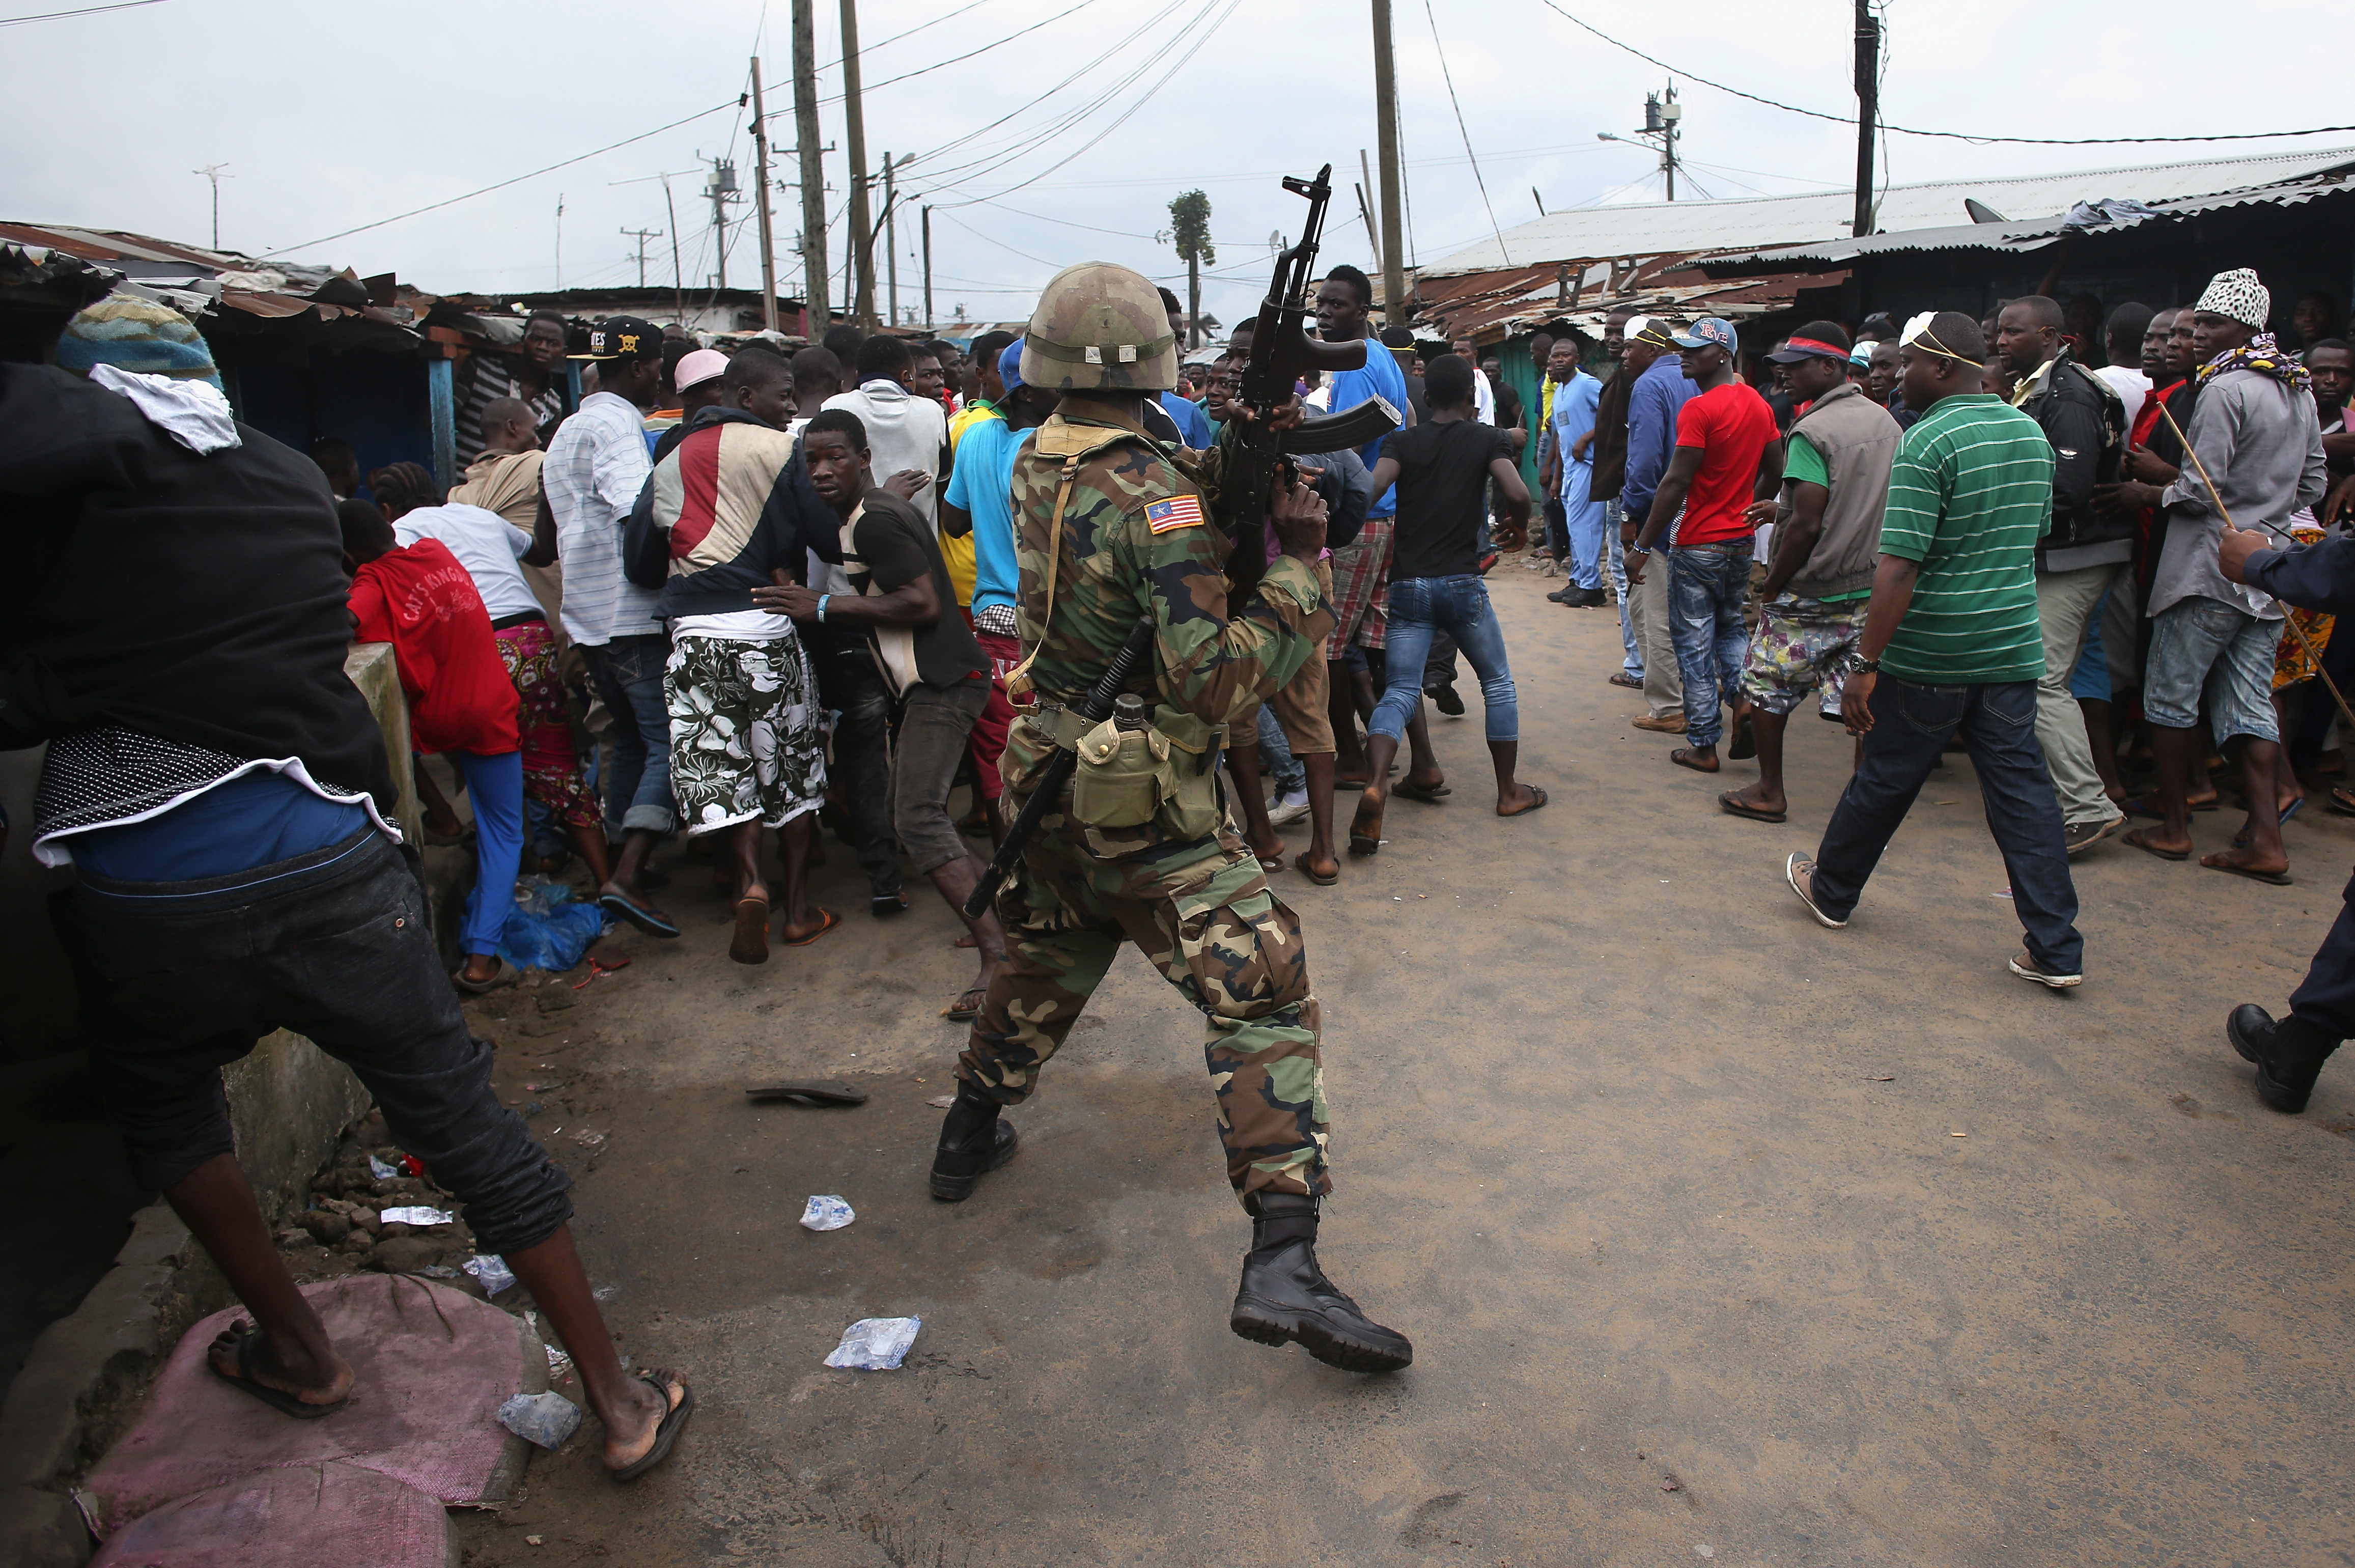 A Liberian Army soldier, part of the Ebola Task Force, pushes back local residents while enforcing a quarantine on the West Point slum on August 20, 2014 in Monrovia, Liberia. (John Moore—Getty Images)